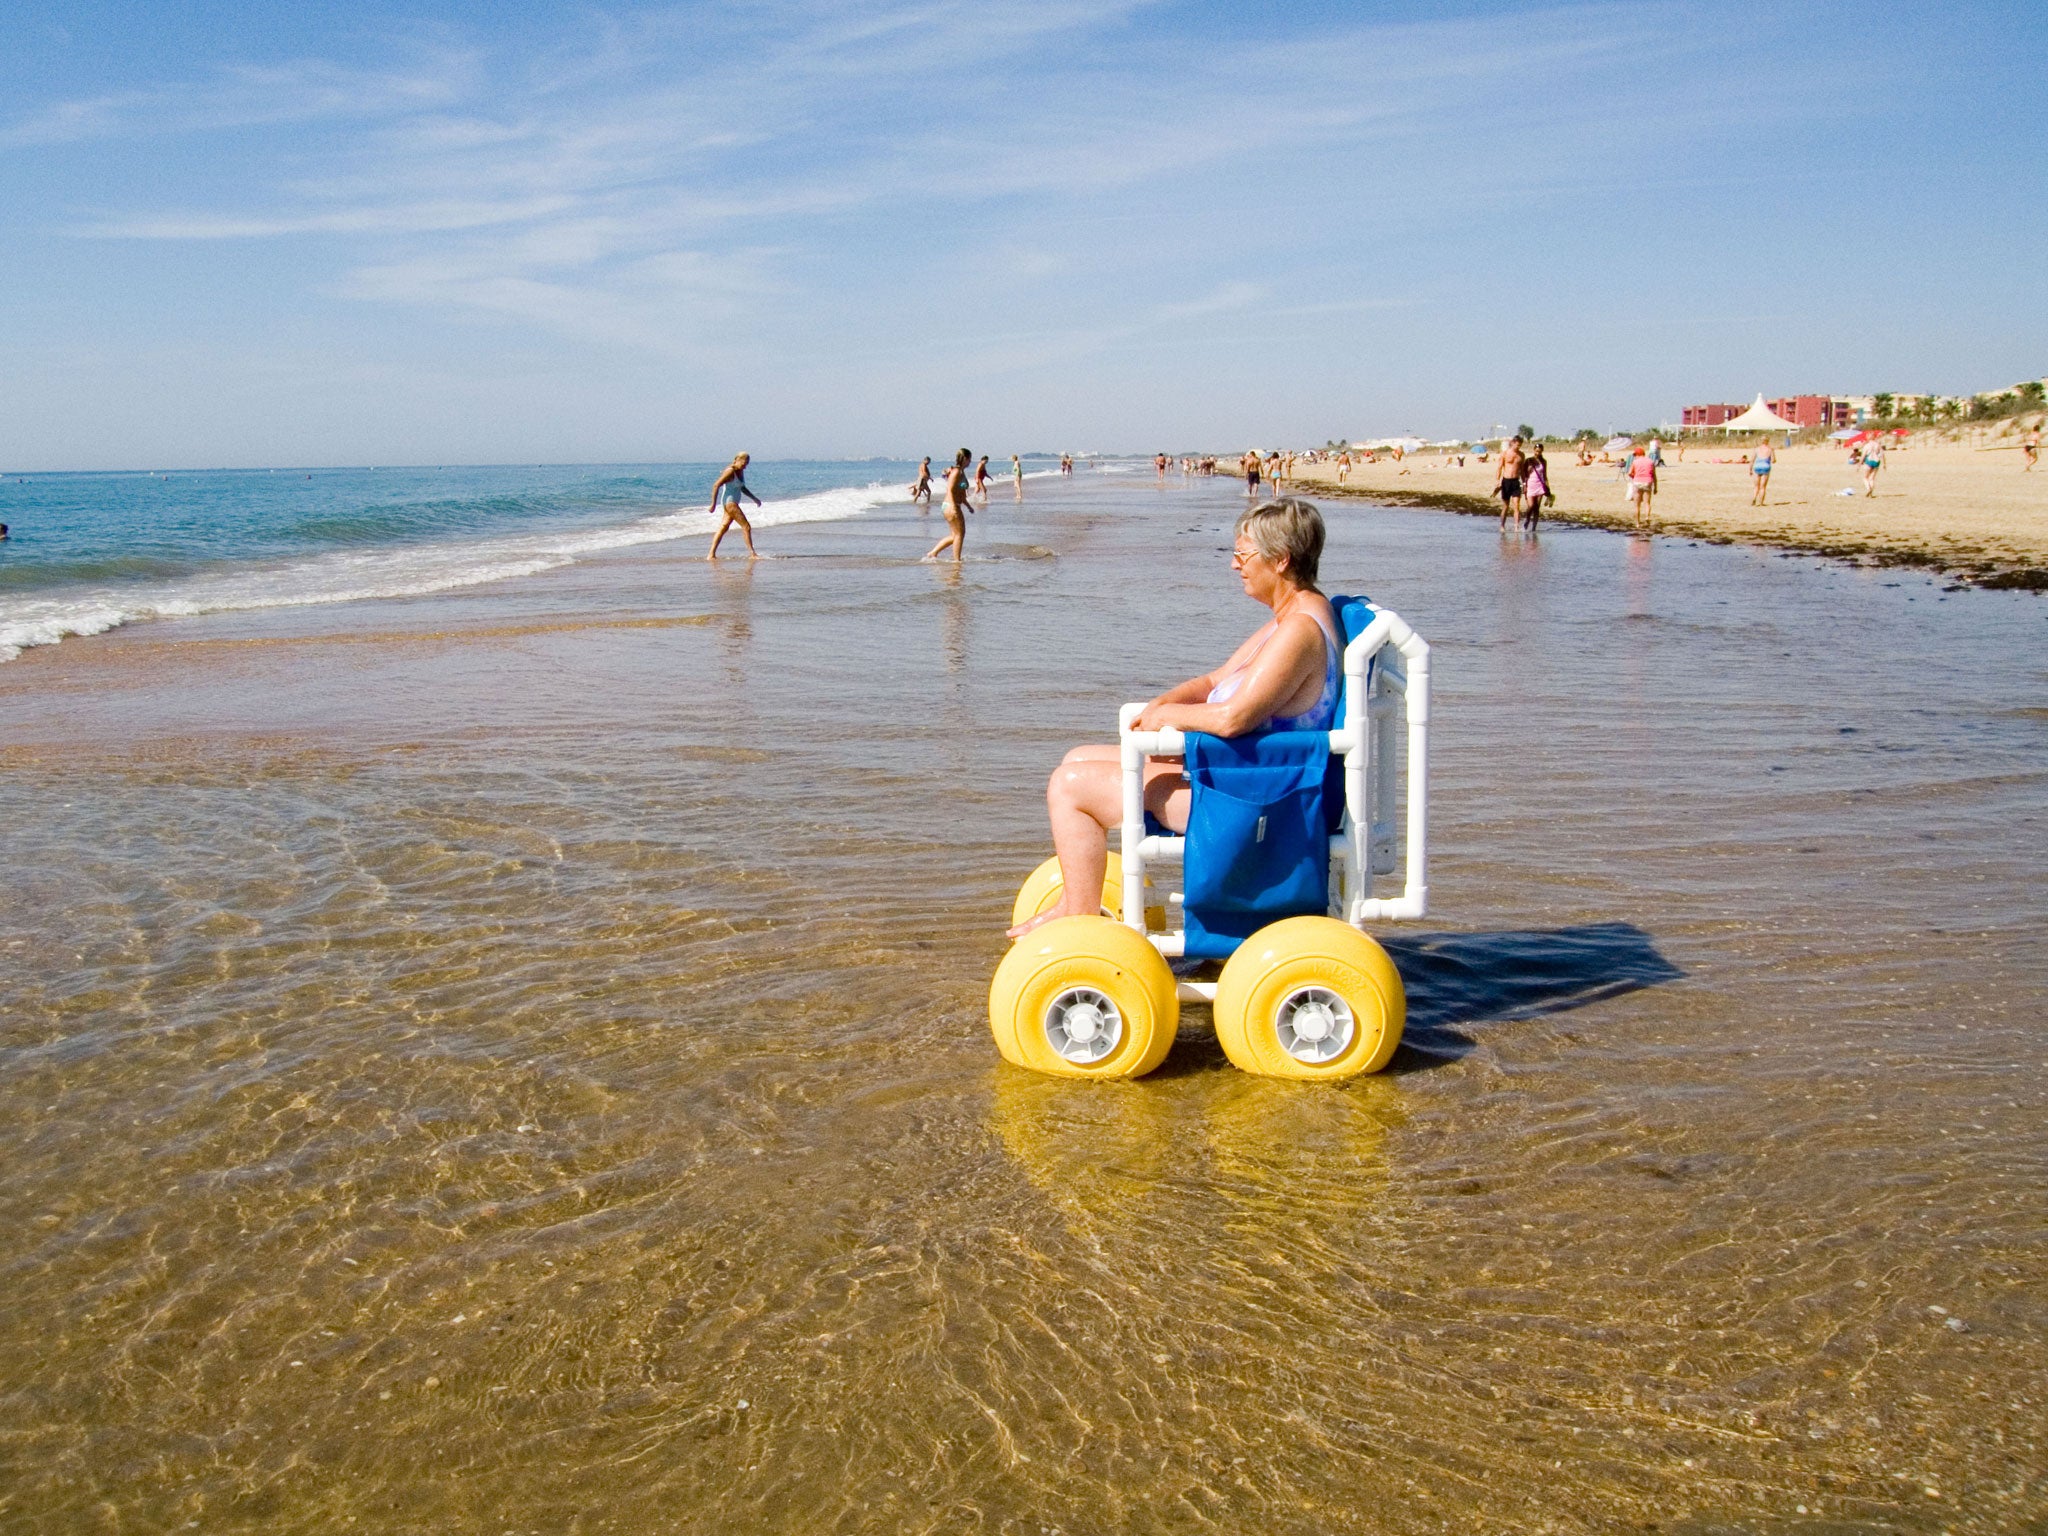 Sea life: with a beach wheelchair, a disabled visitor can go on the sand and take to the water